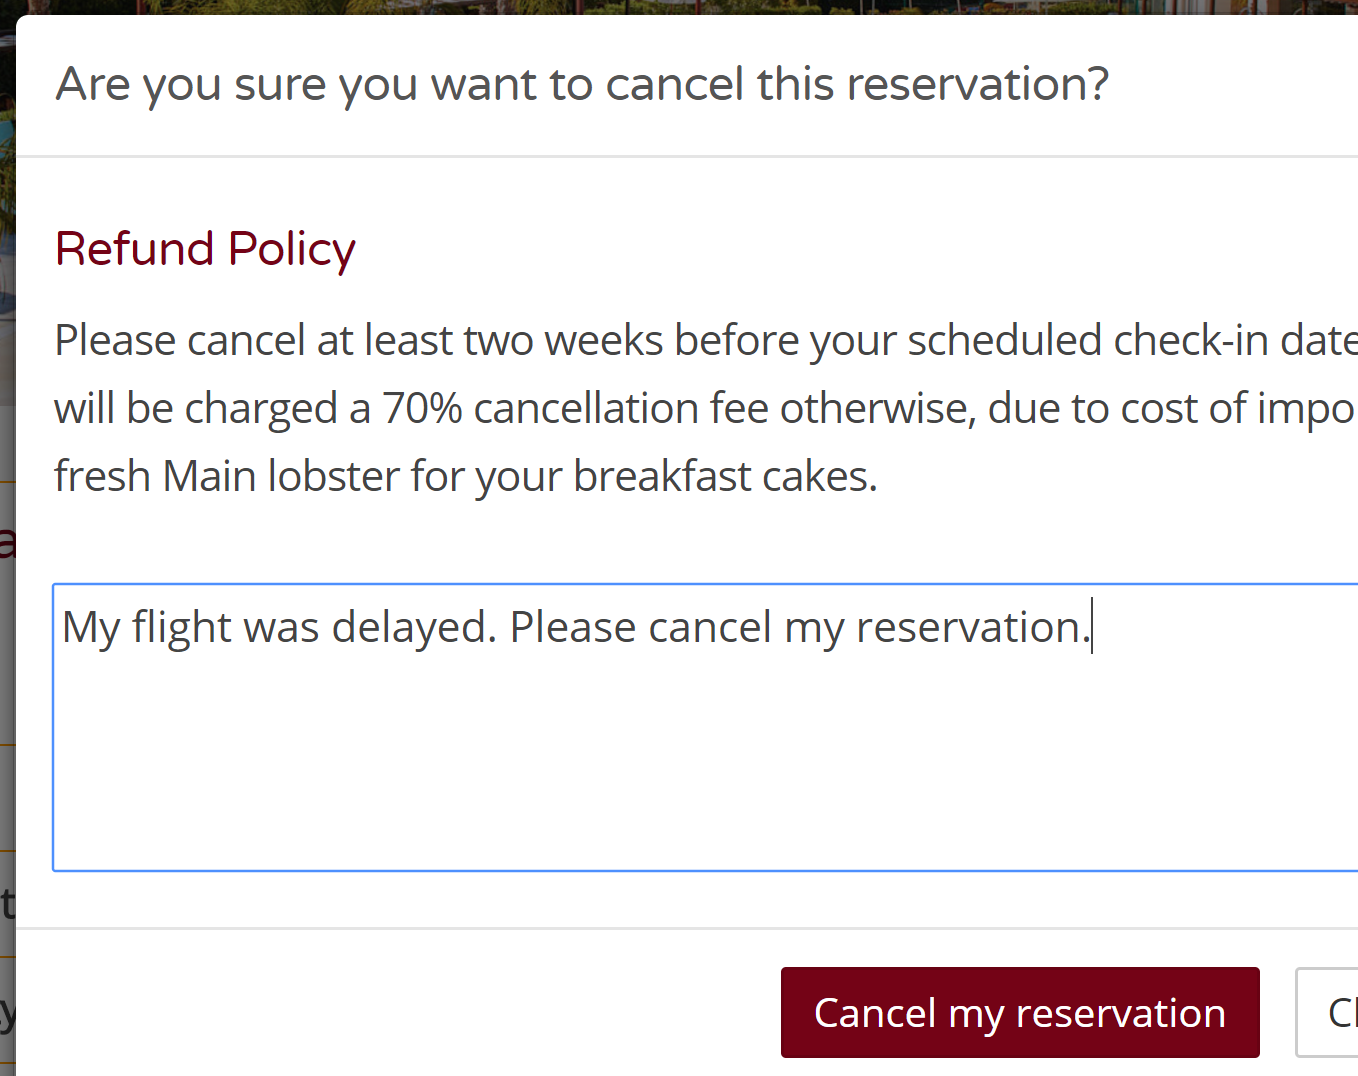 Cancel through the booking engine